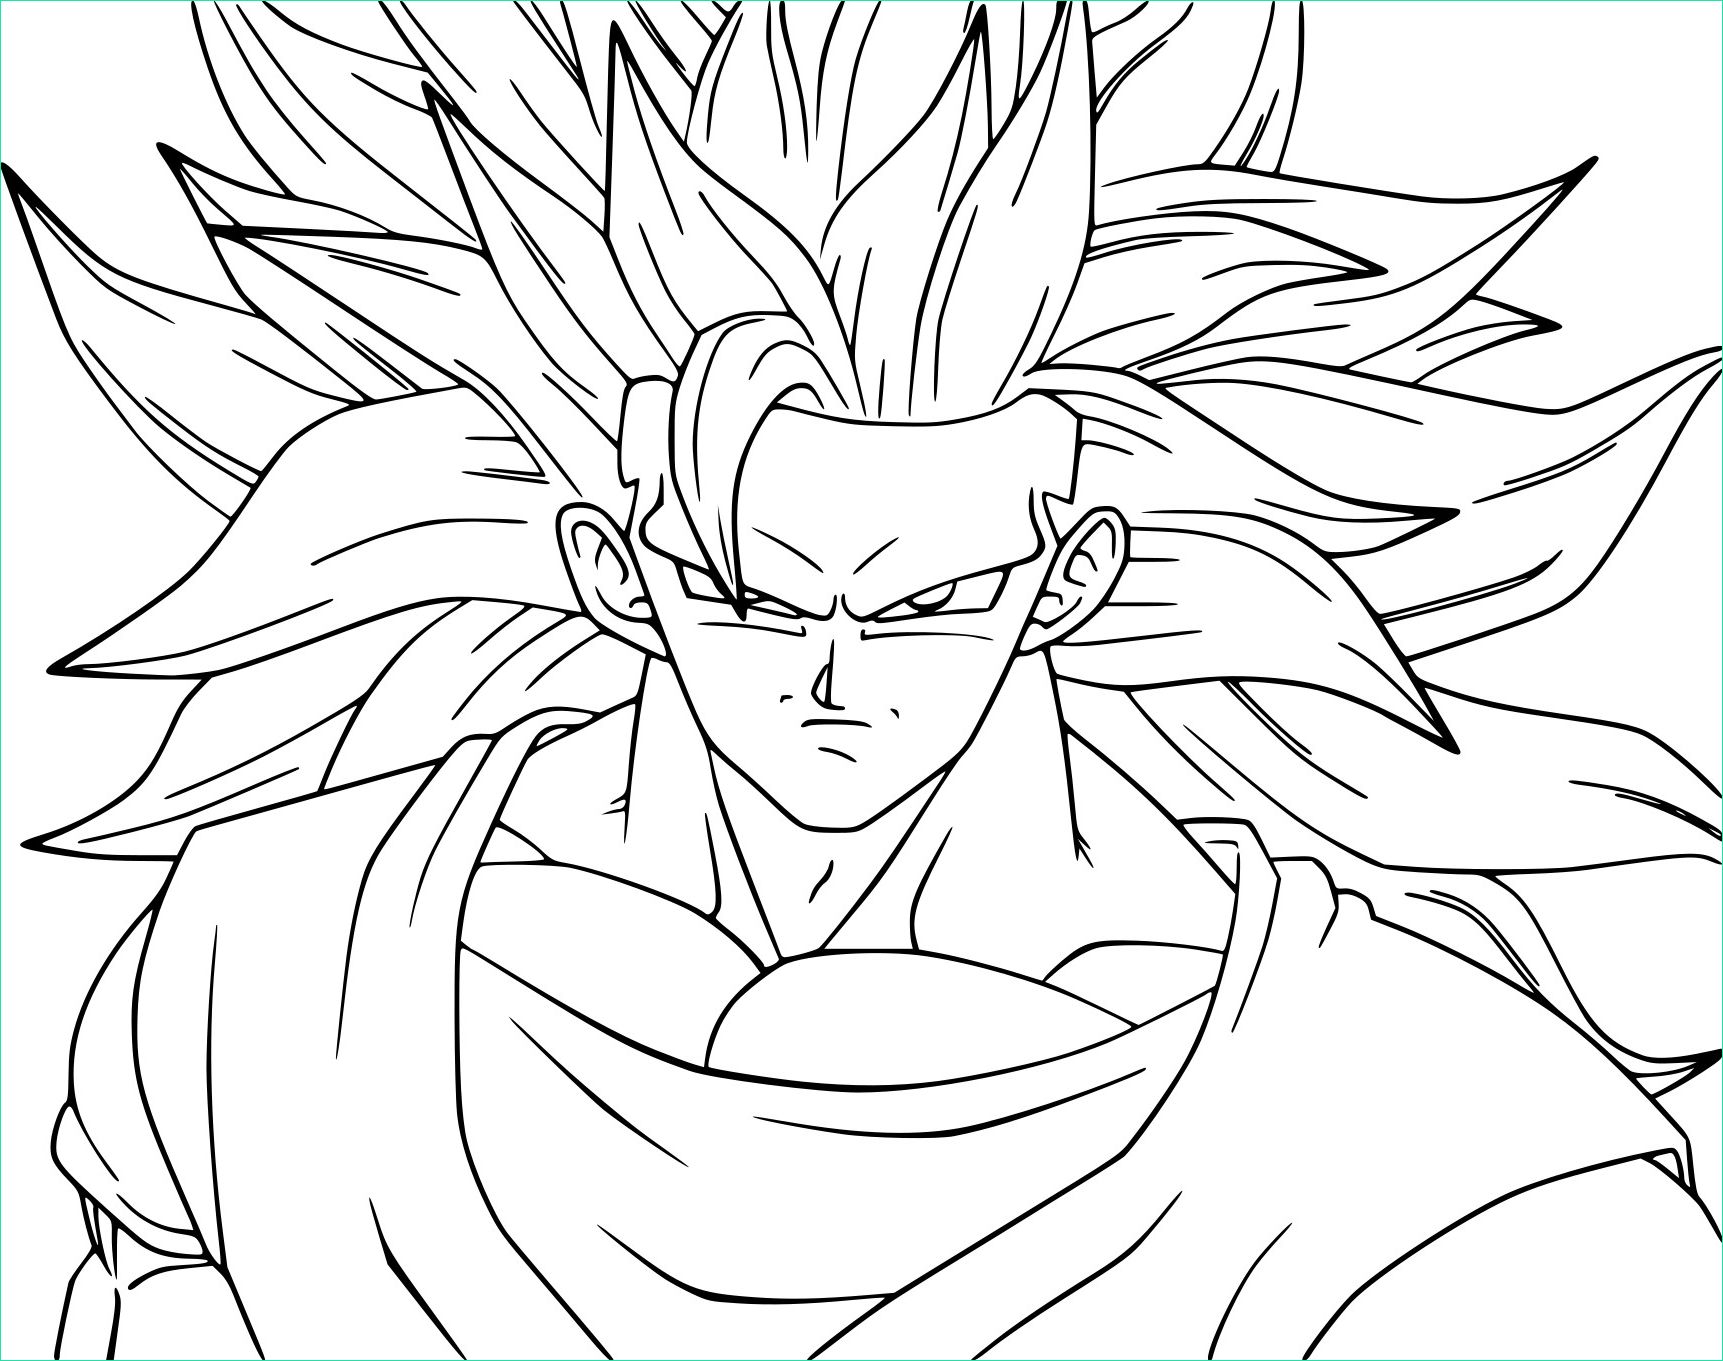 Dessin A Imprimer Dragon Ball Luxe Images Meilleur De Dessin A Imprimer Dragon Ball Super